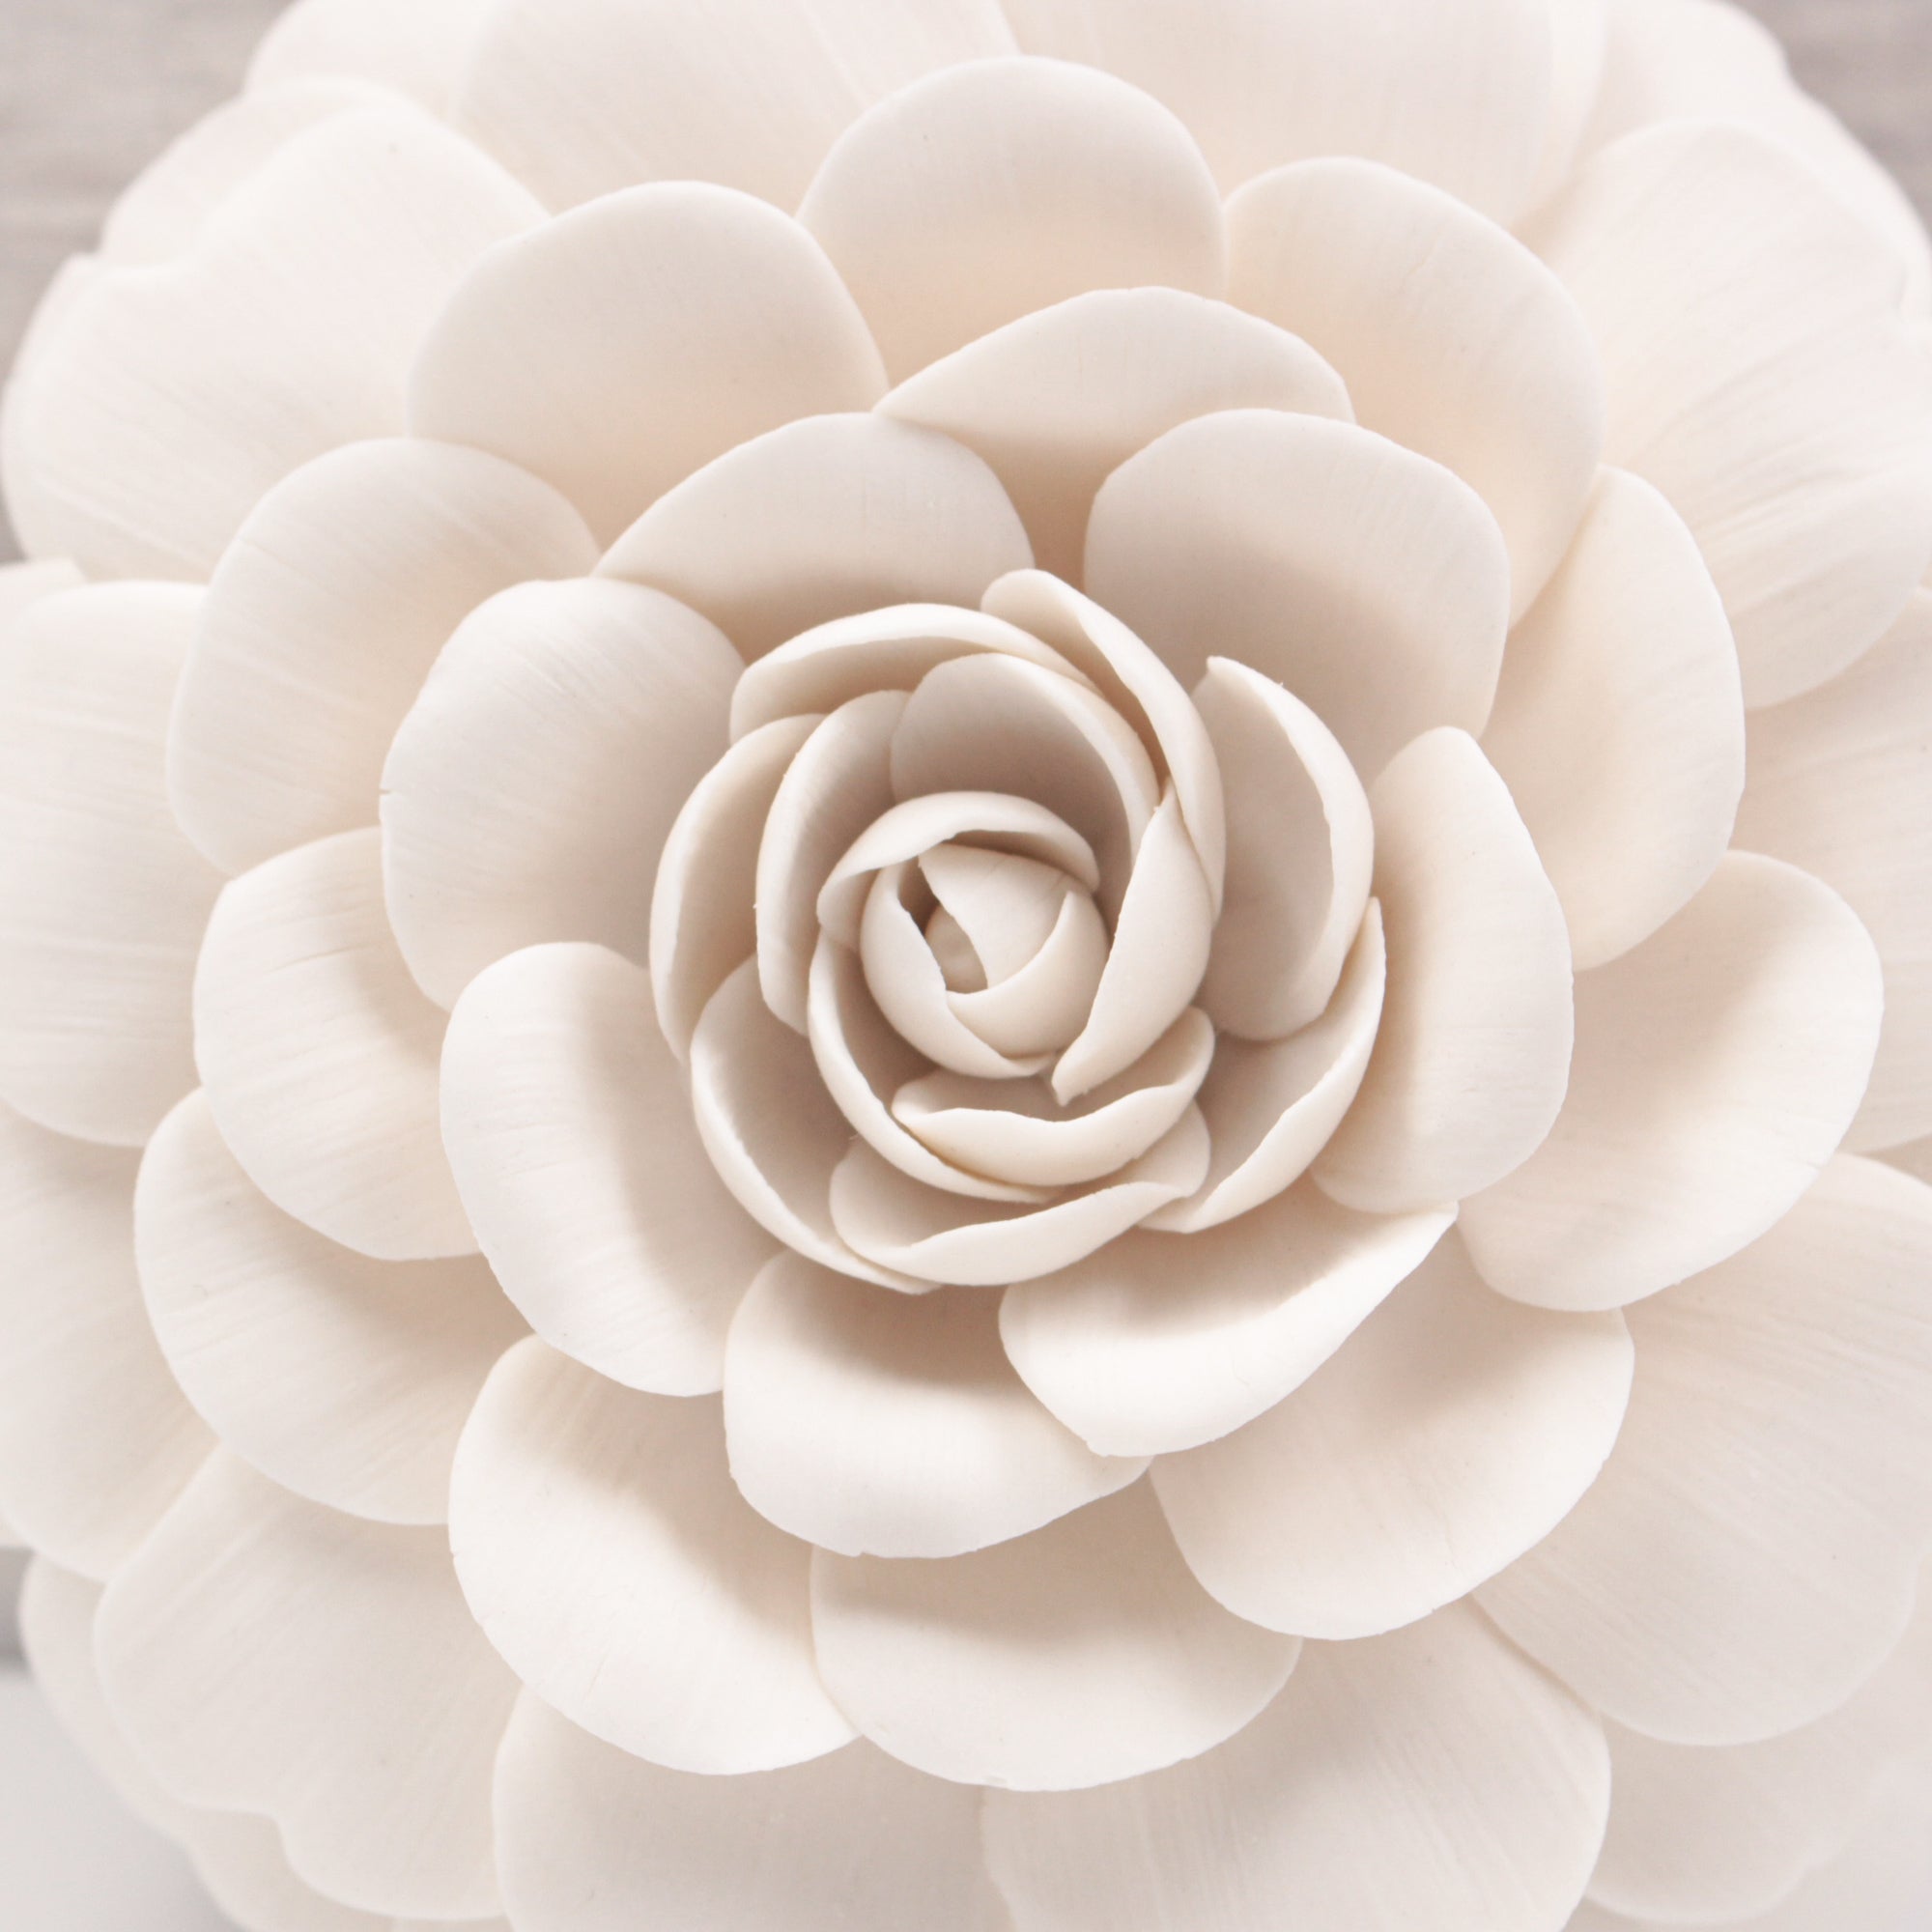 Large Porcelain Camellia - Handmade Porcelain Flower for Interior and Event Decoration - Made in France by Alain Granell 